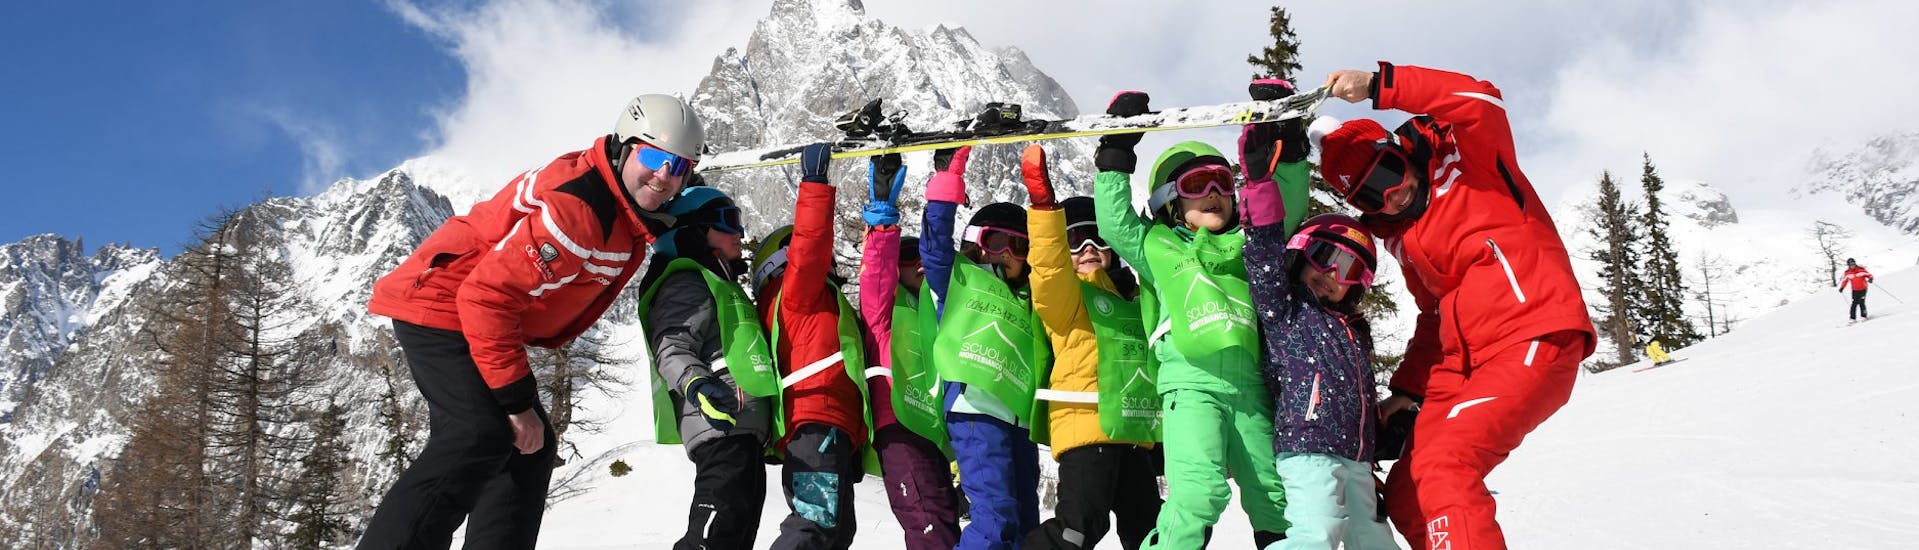 Some kids take a group picture during the Kids Ski Lessons (4-12 y.) for Intermediate Skiers with Scuola di Sci Monte Bianco Courmayeur.